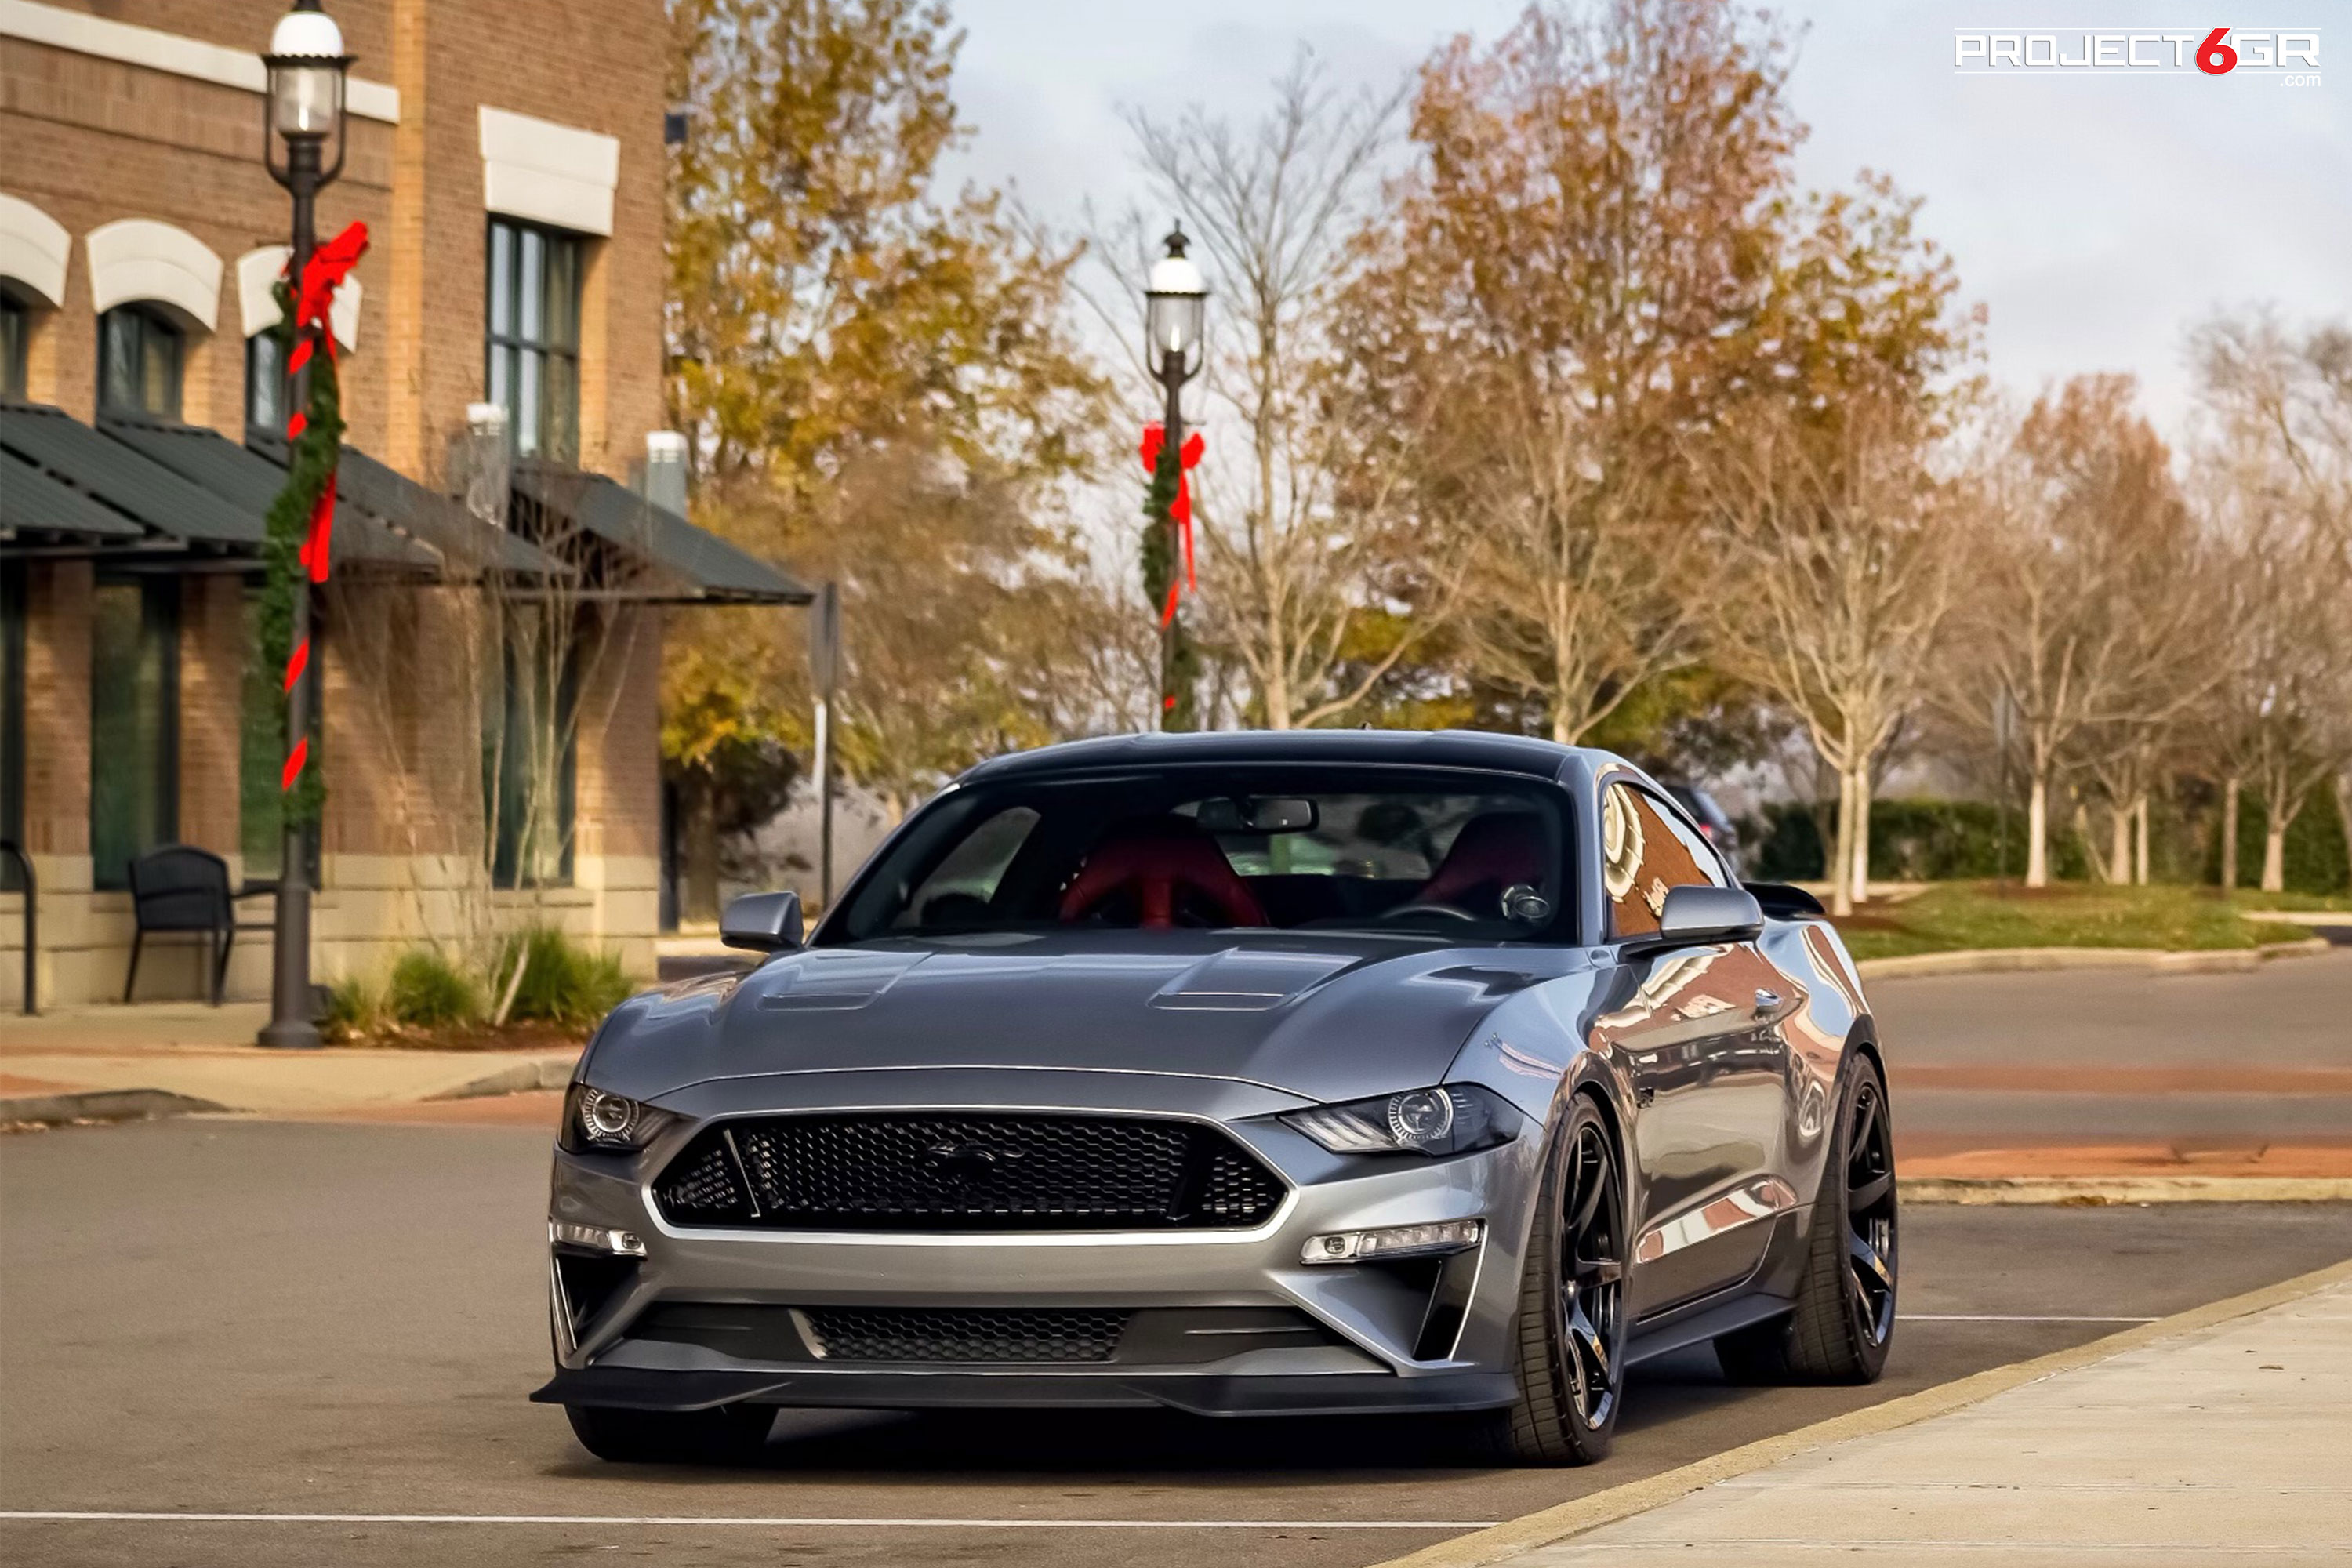 Iconic Silver Mustang GT gets a new color combo sporting Project 6GR 7 ...